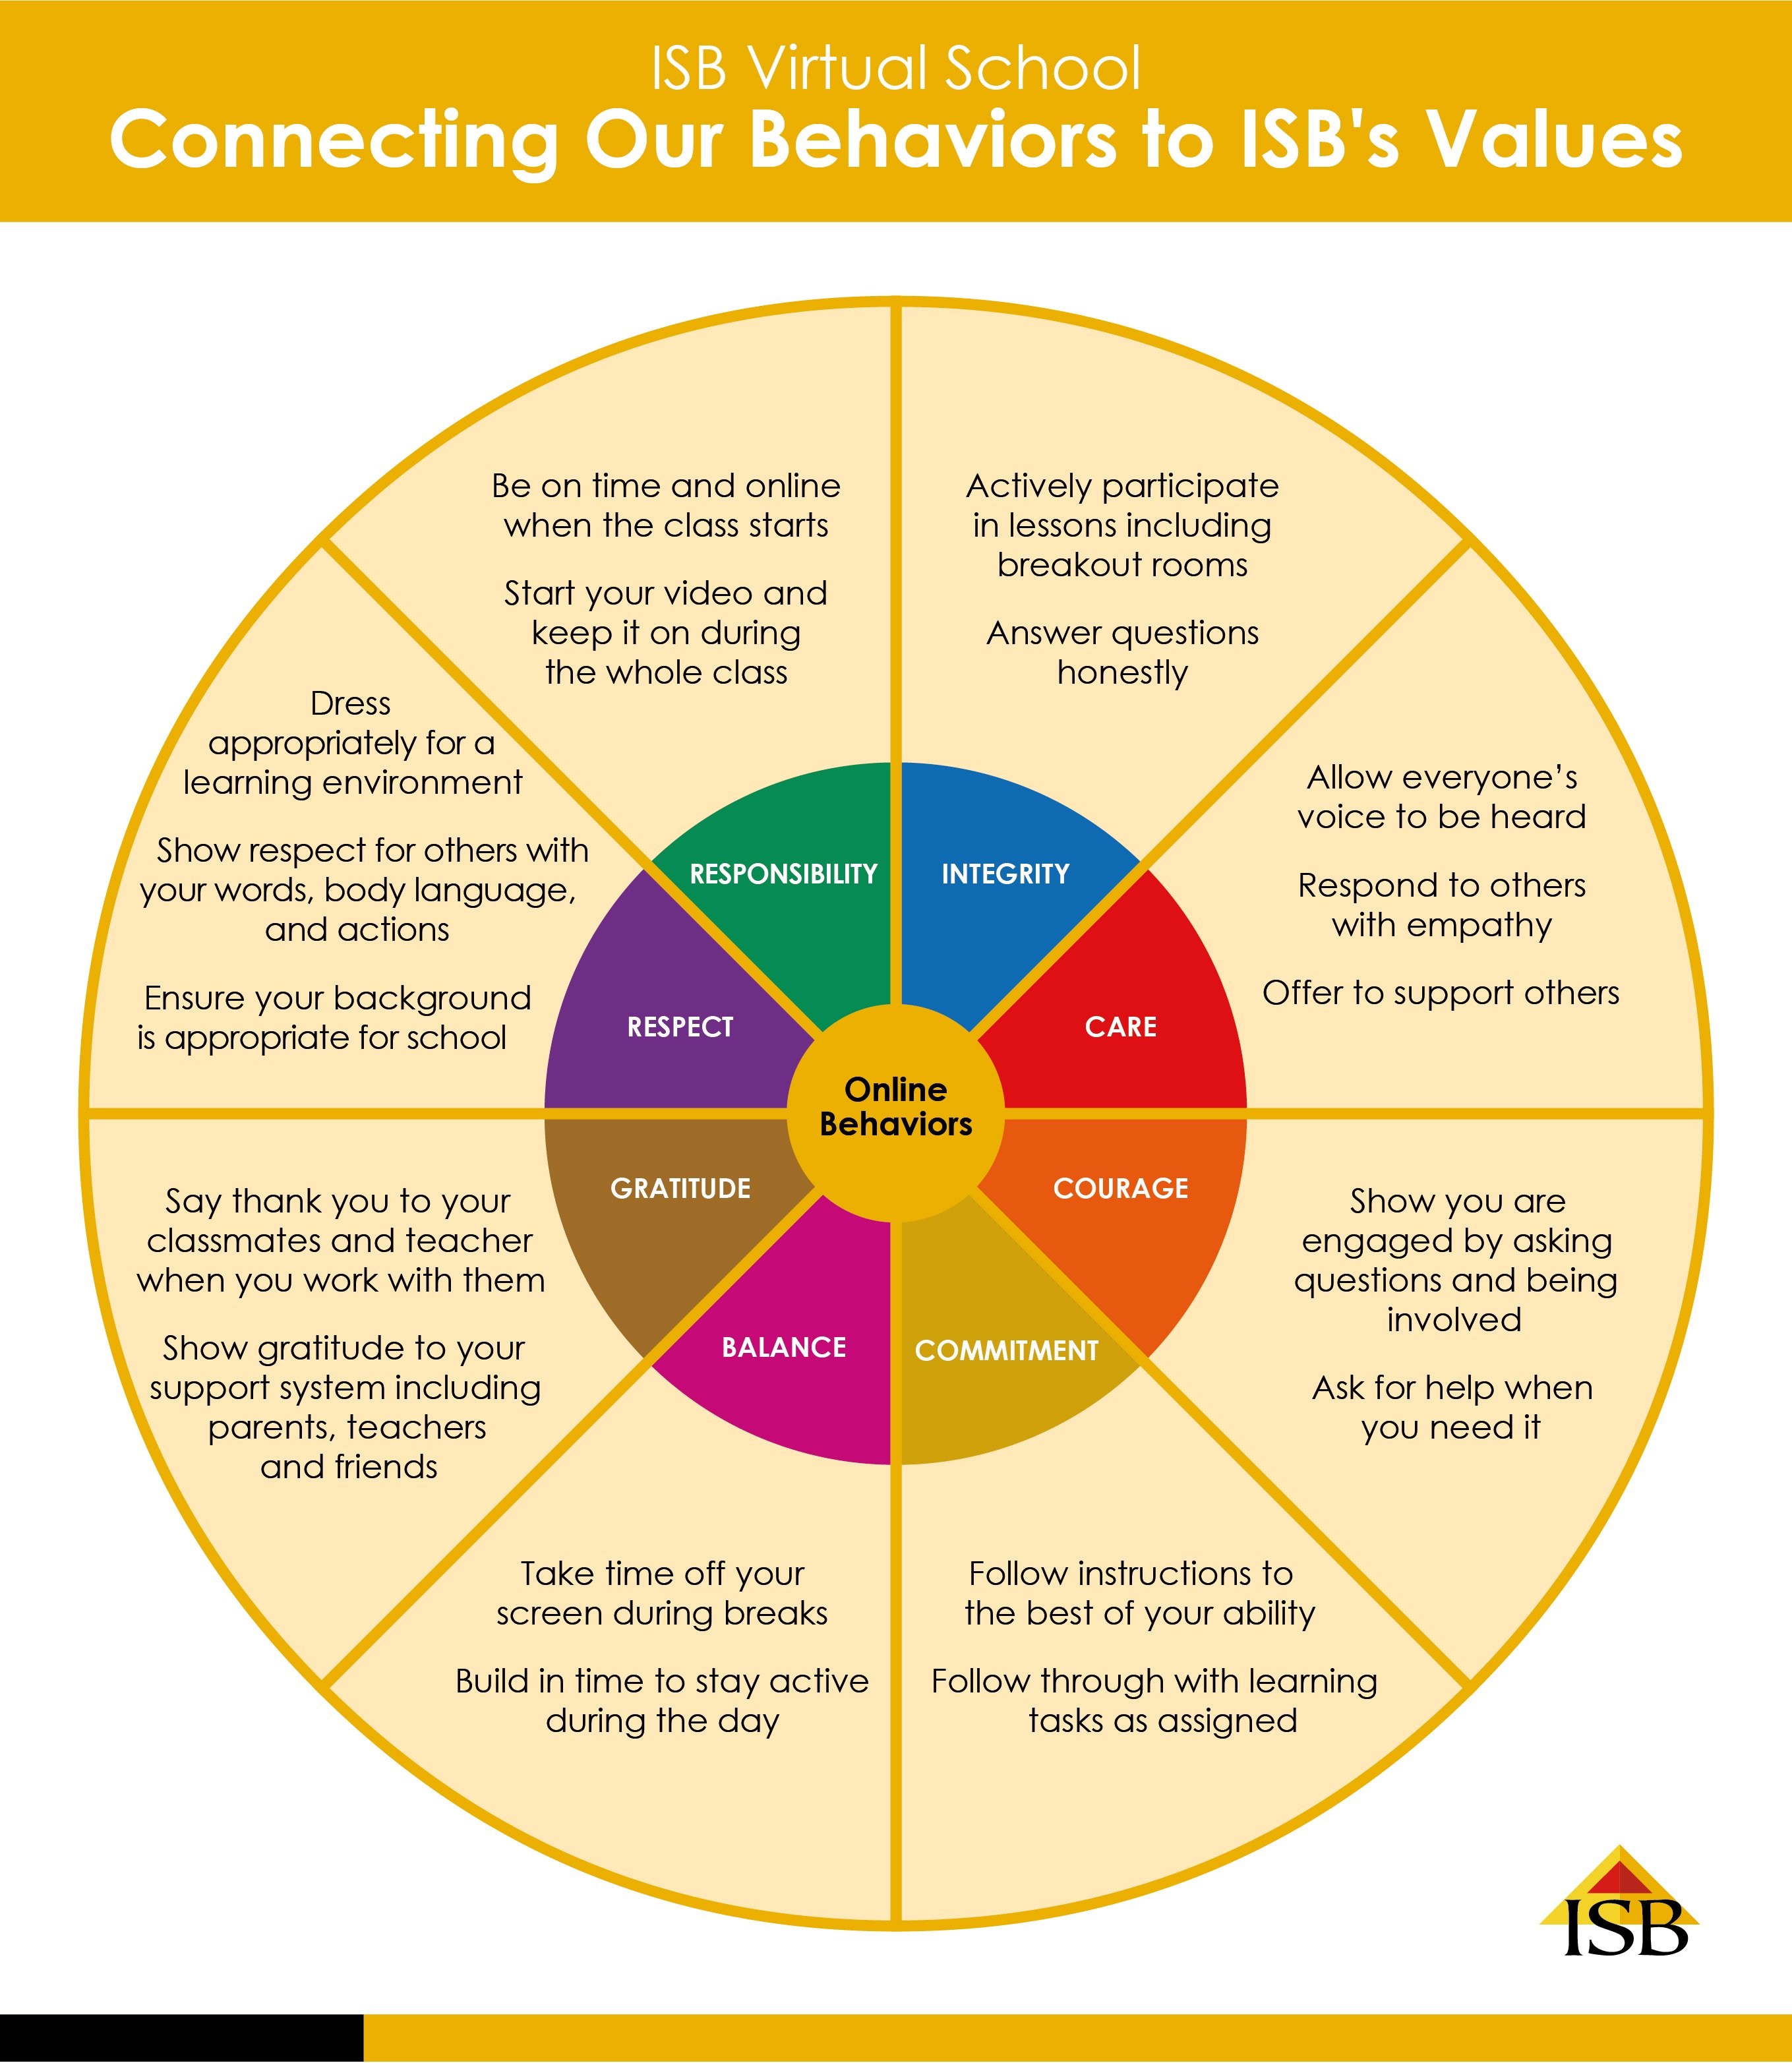 Connecting Our Behaviors to ISBs Values_updated 11.08.21